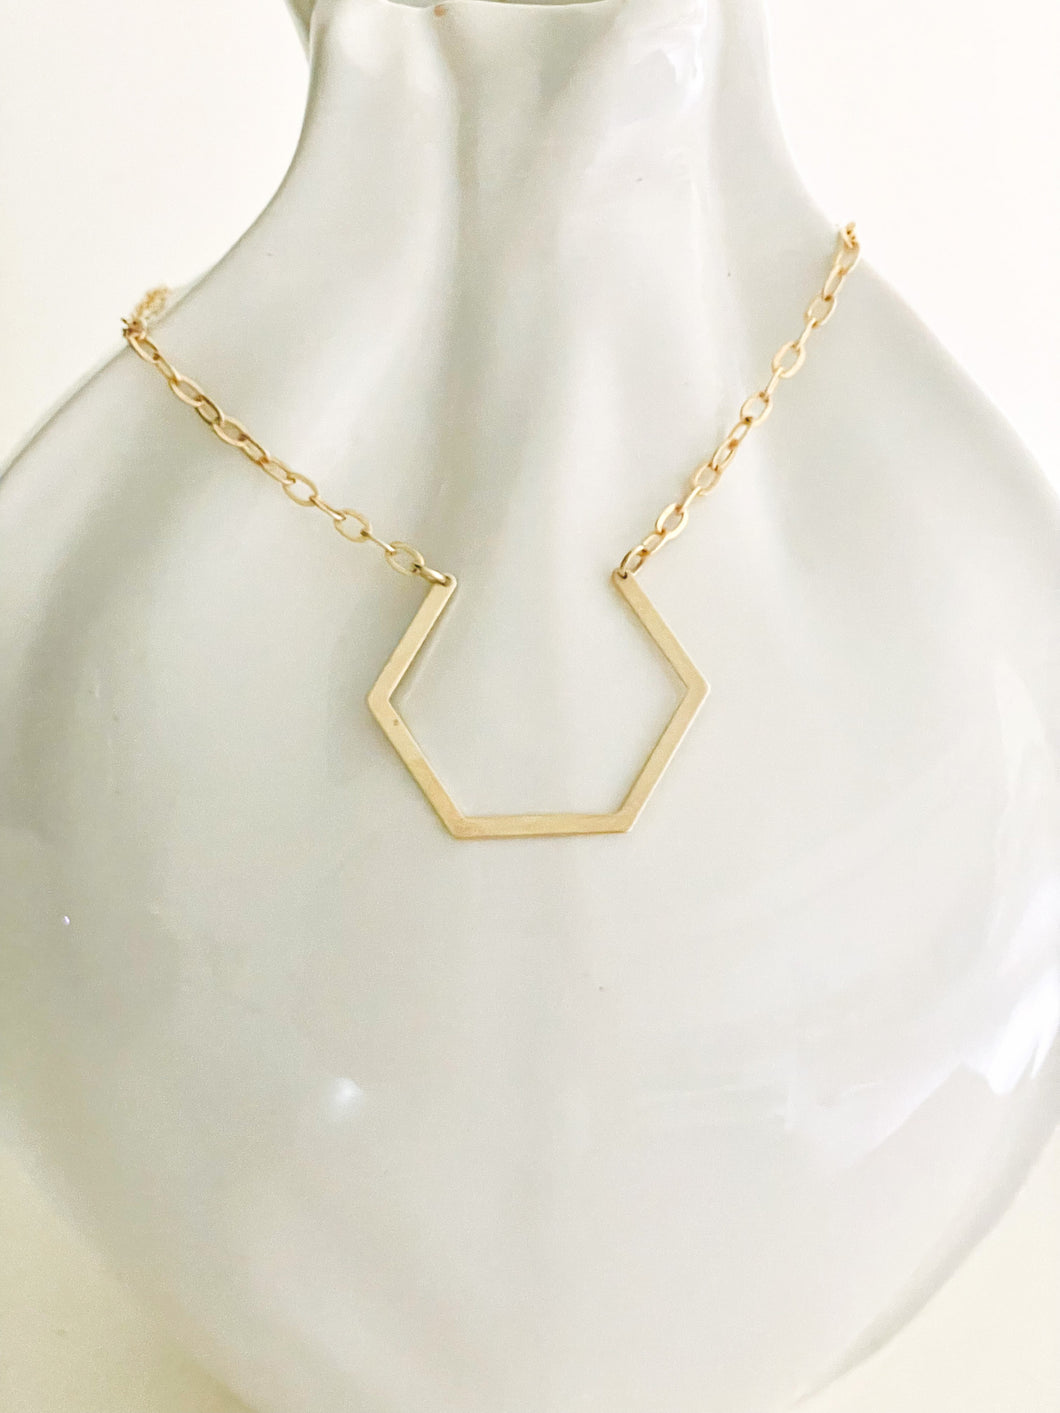 The Maudie Necklace